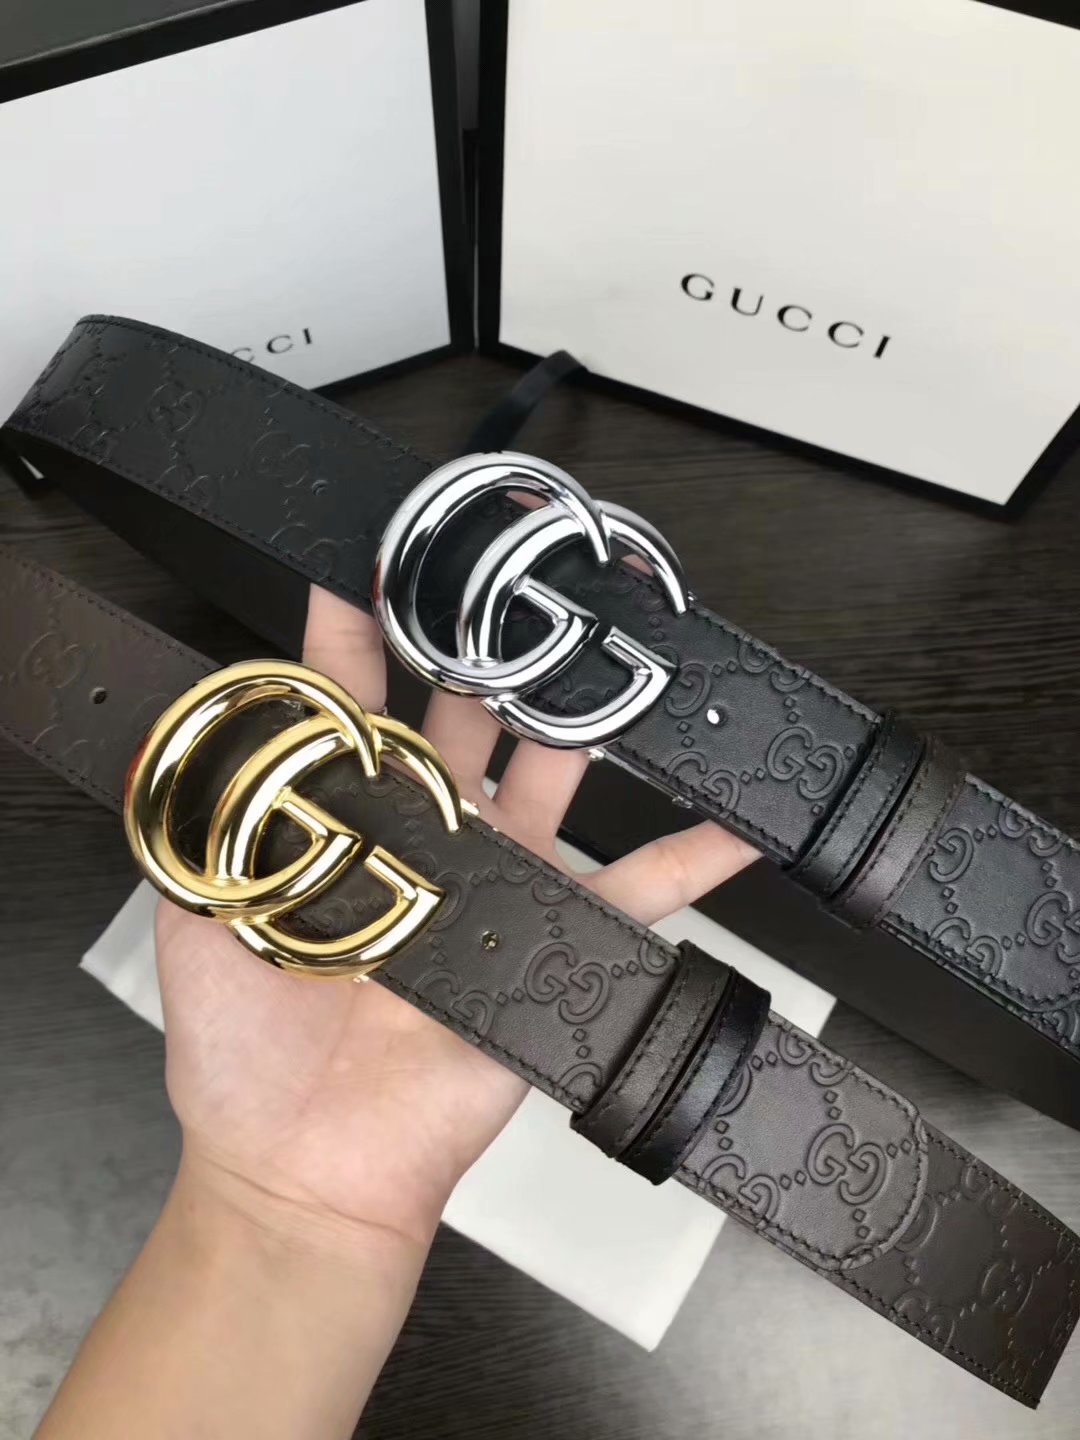 Cheap Replica Gucci Men Leather Belt Width 3.8cm With Silver Gold Buckle 064